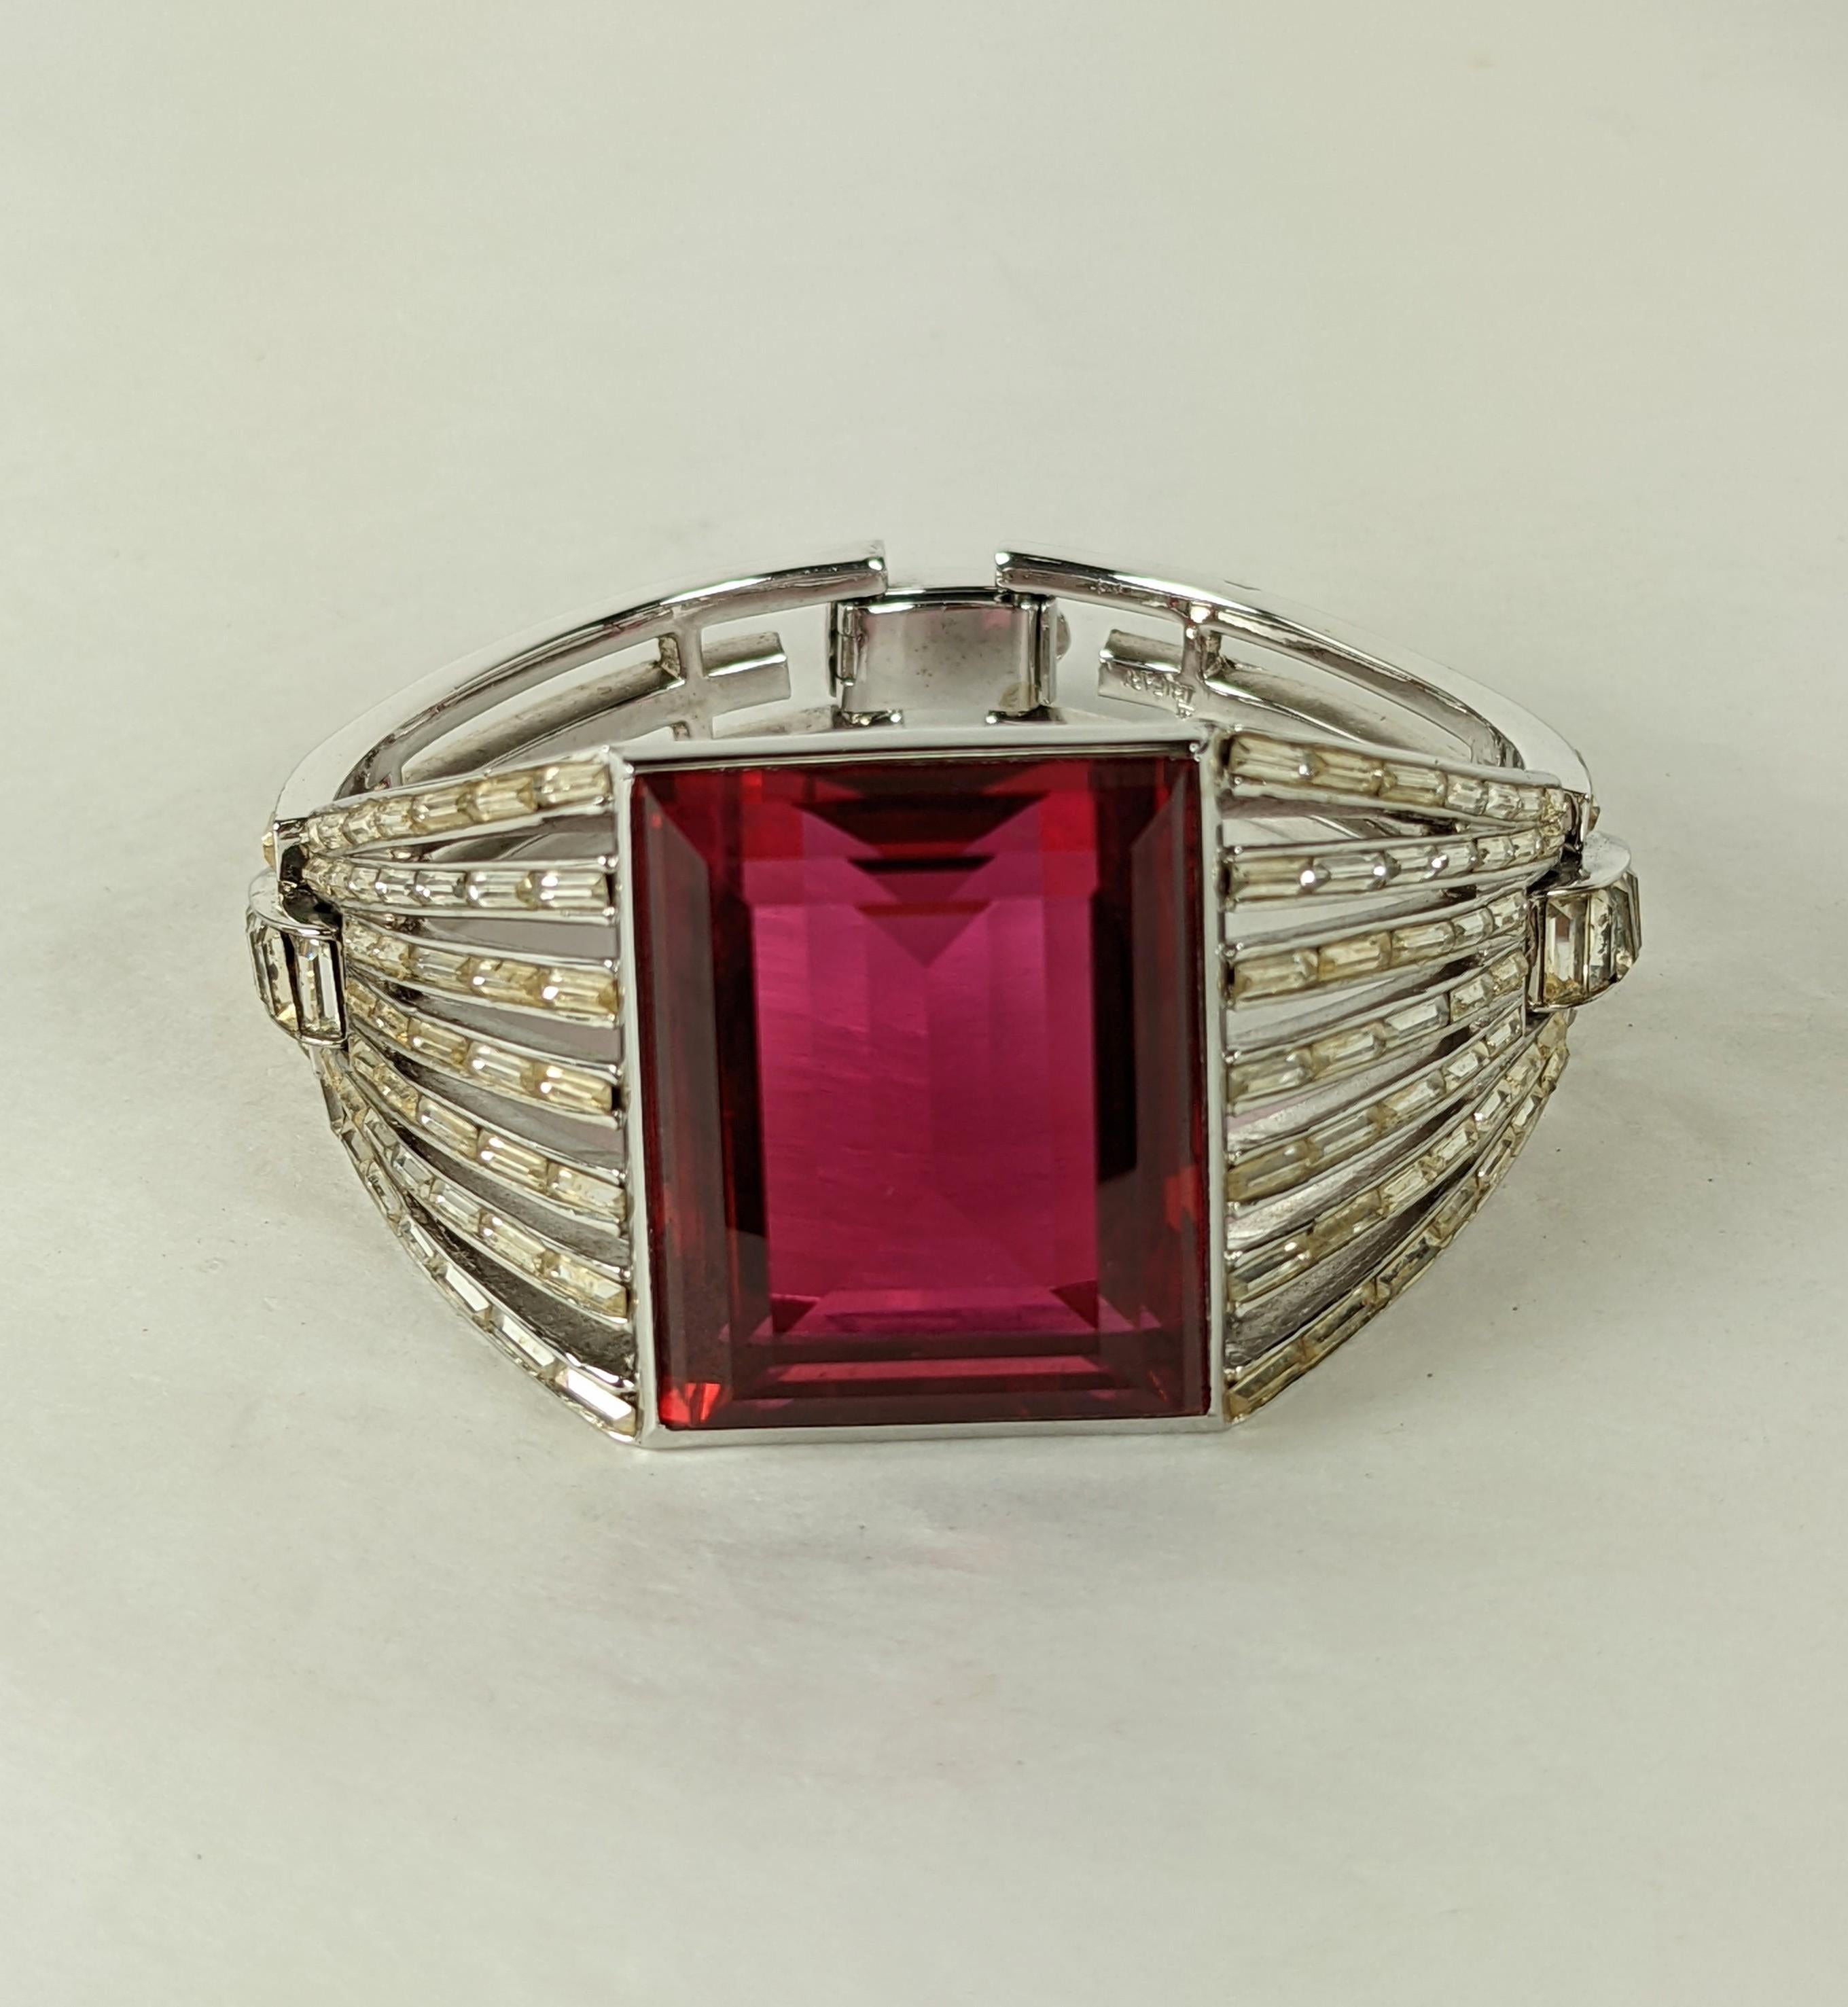 Wonderful and rare Trifari 'Alfred Philippe' 'Monte Cristo' Series Giant Square Cut Faux Ruby and Diamante Baguettes Sunburst Cuff from the 1950's. Hinged at the sides with dozens of crystal baguettes fanning out from central stones all the way to